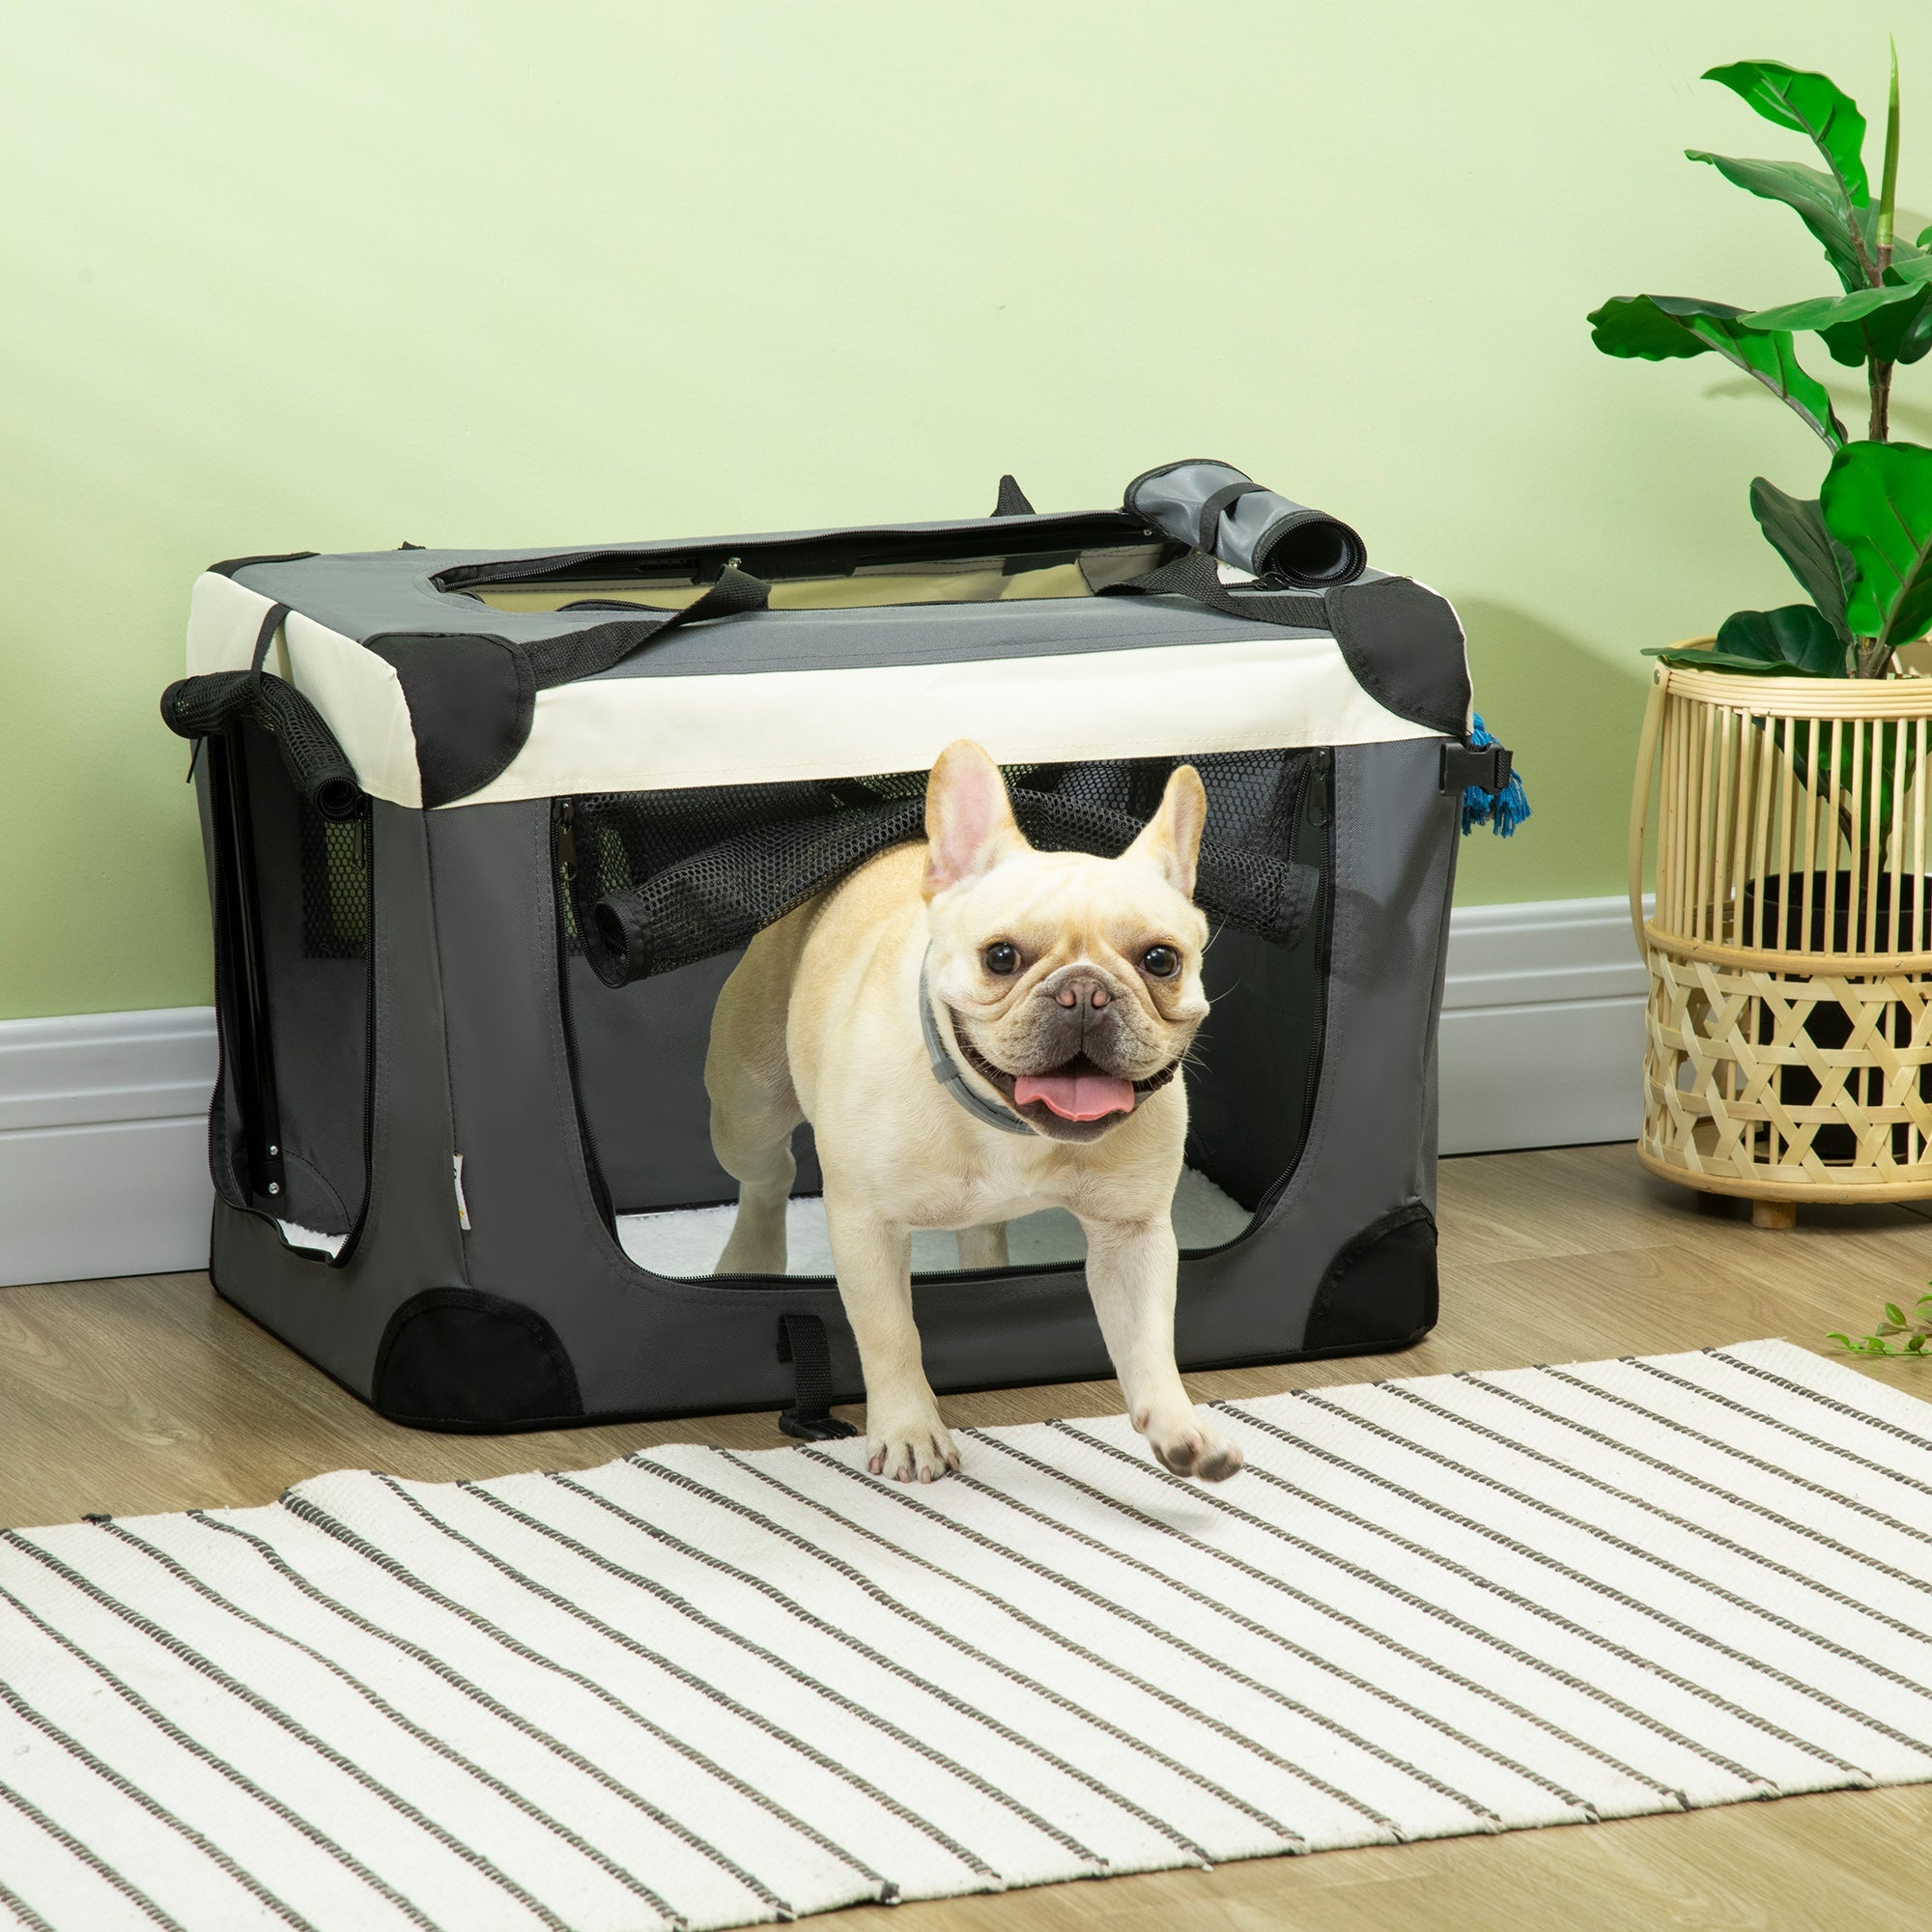 60cm Foldable Pet Carrier, with Cushion, for Miniature Dogs and Cats - Grey-1